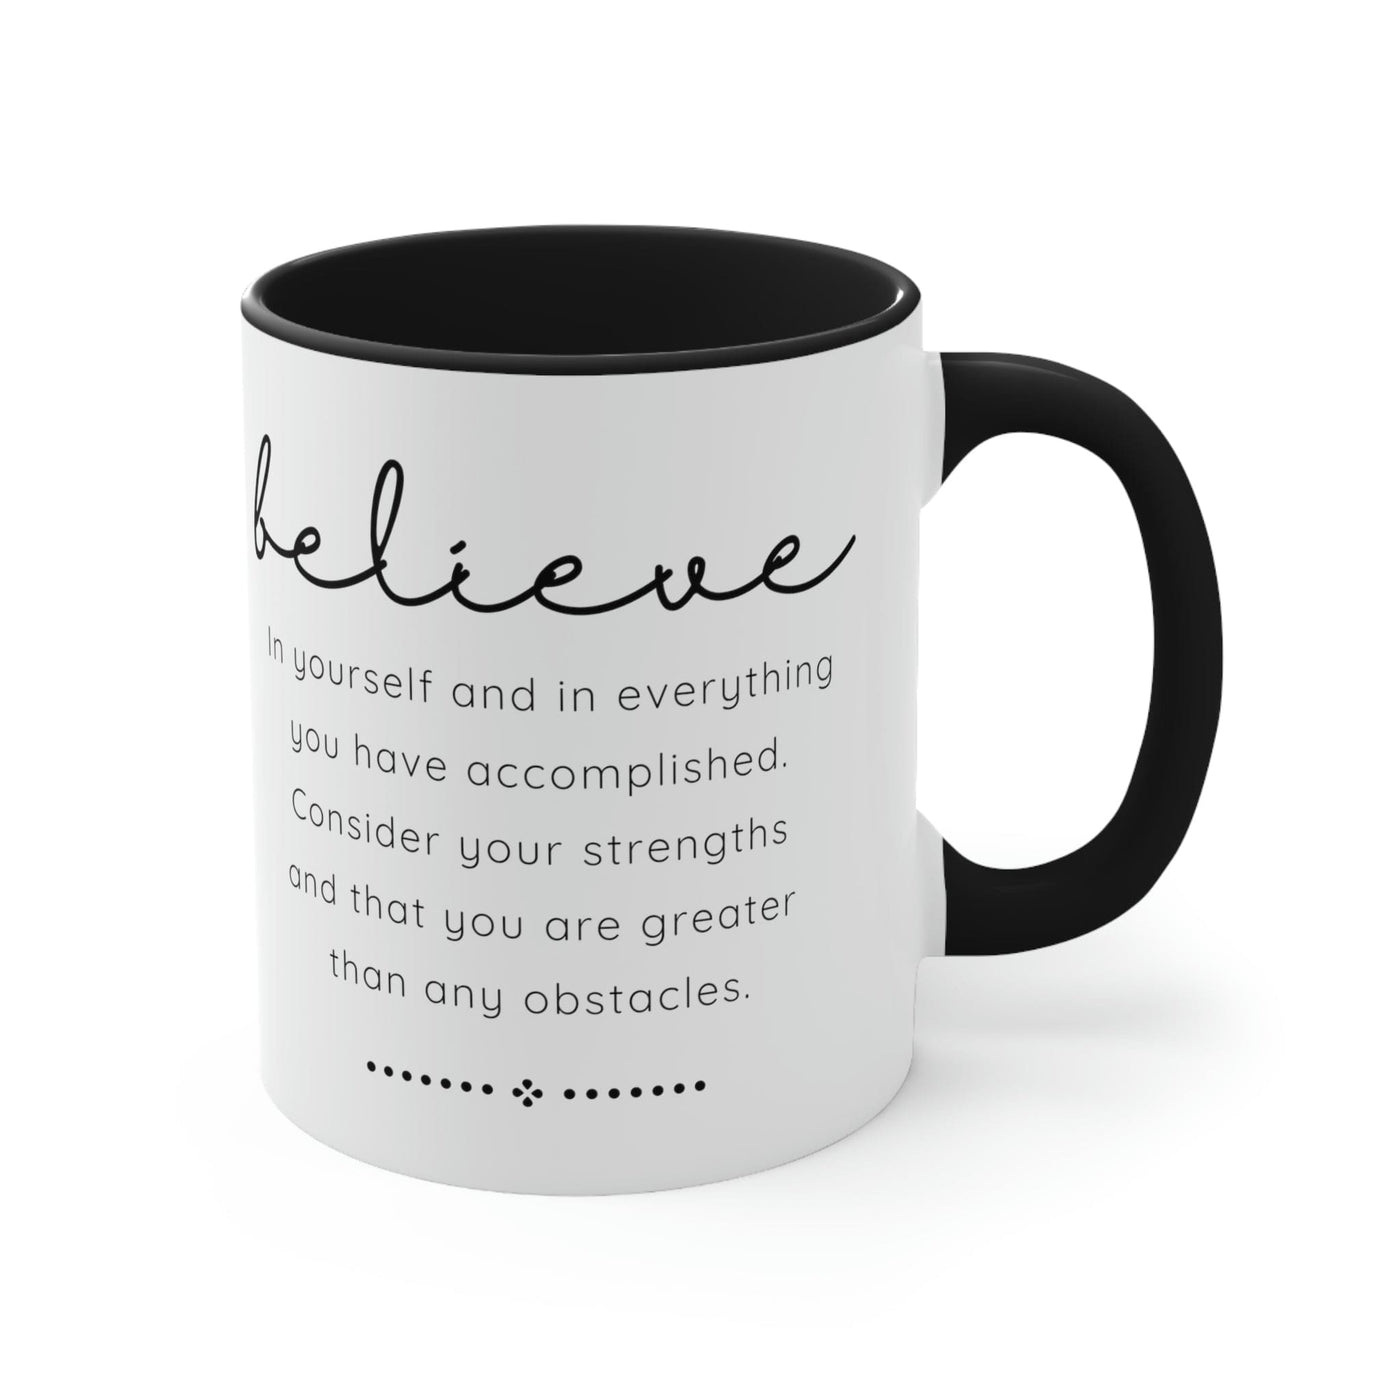 Two-tone Accent Ceramic Mug 11oz Believe In Yourself - Inspirational Motivation